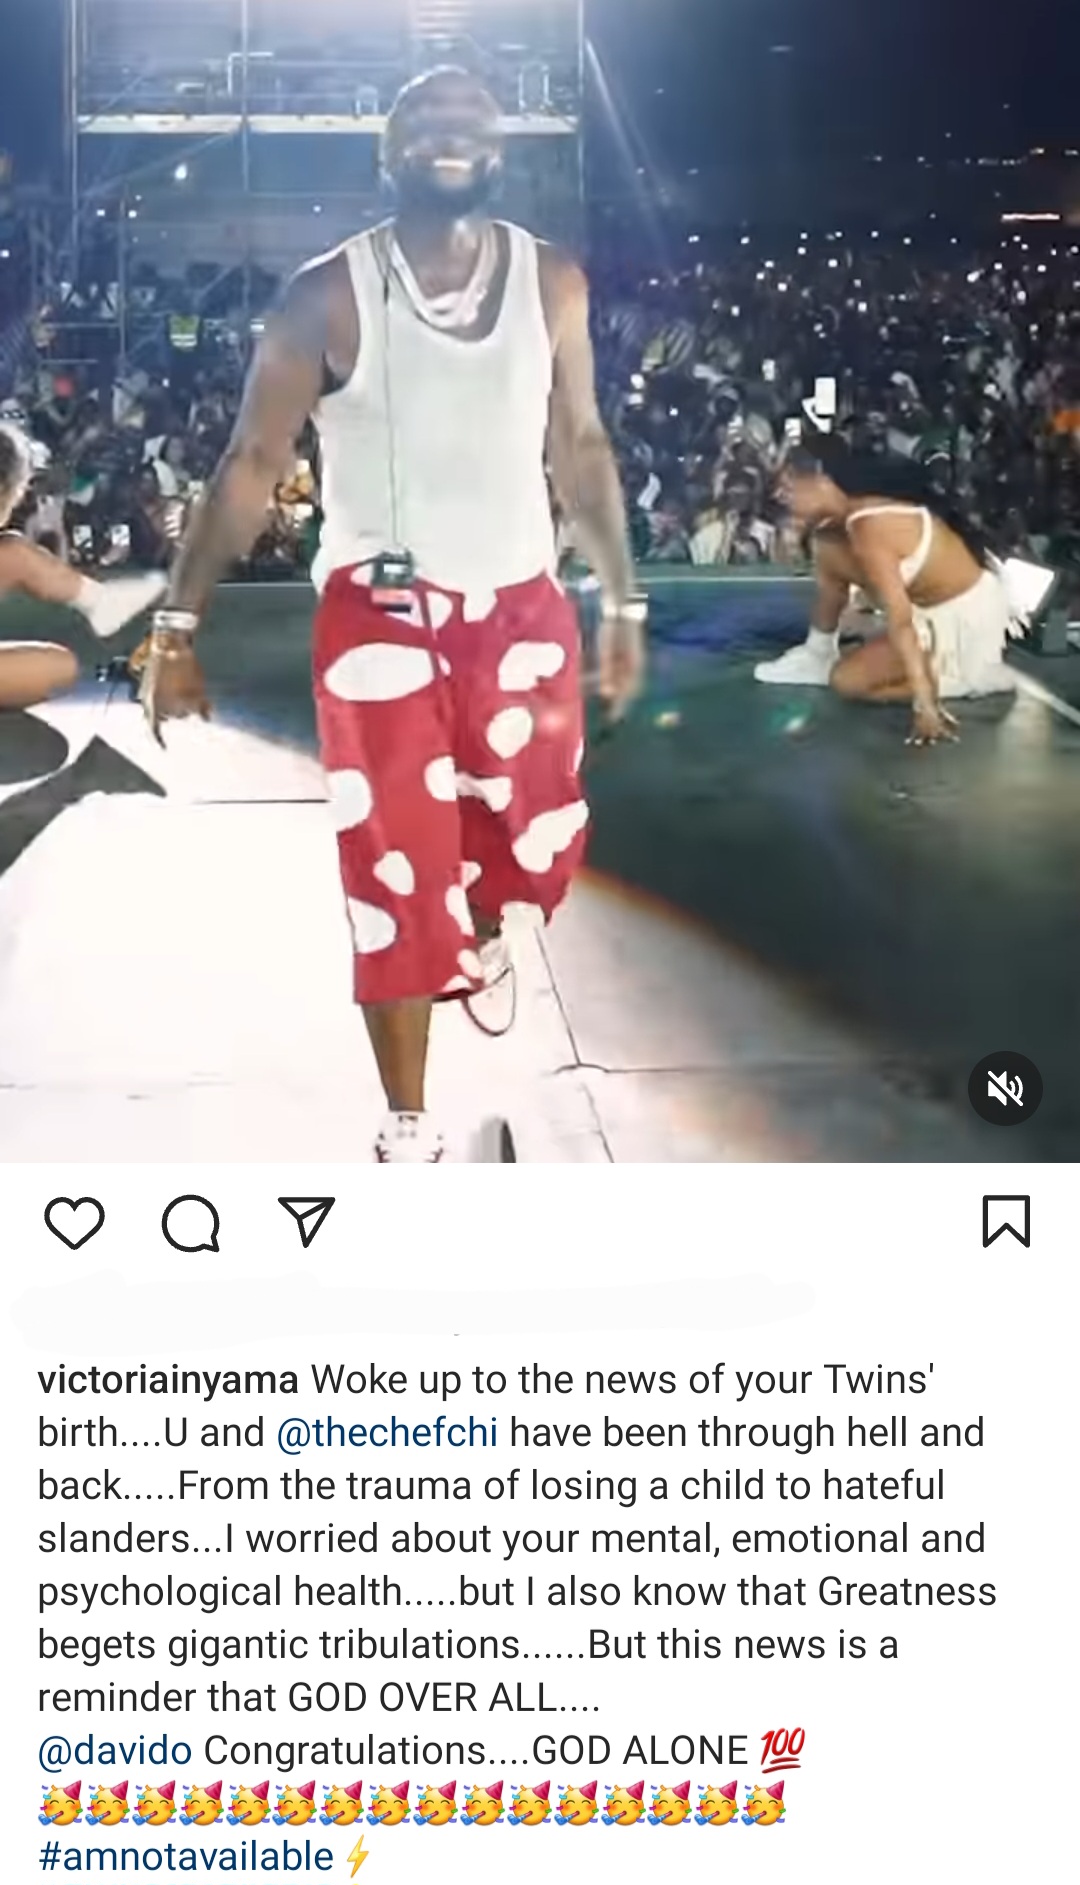 Davido and Chioma have welcomed twins